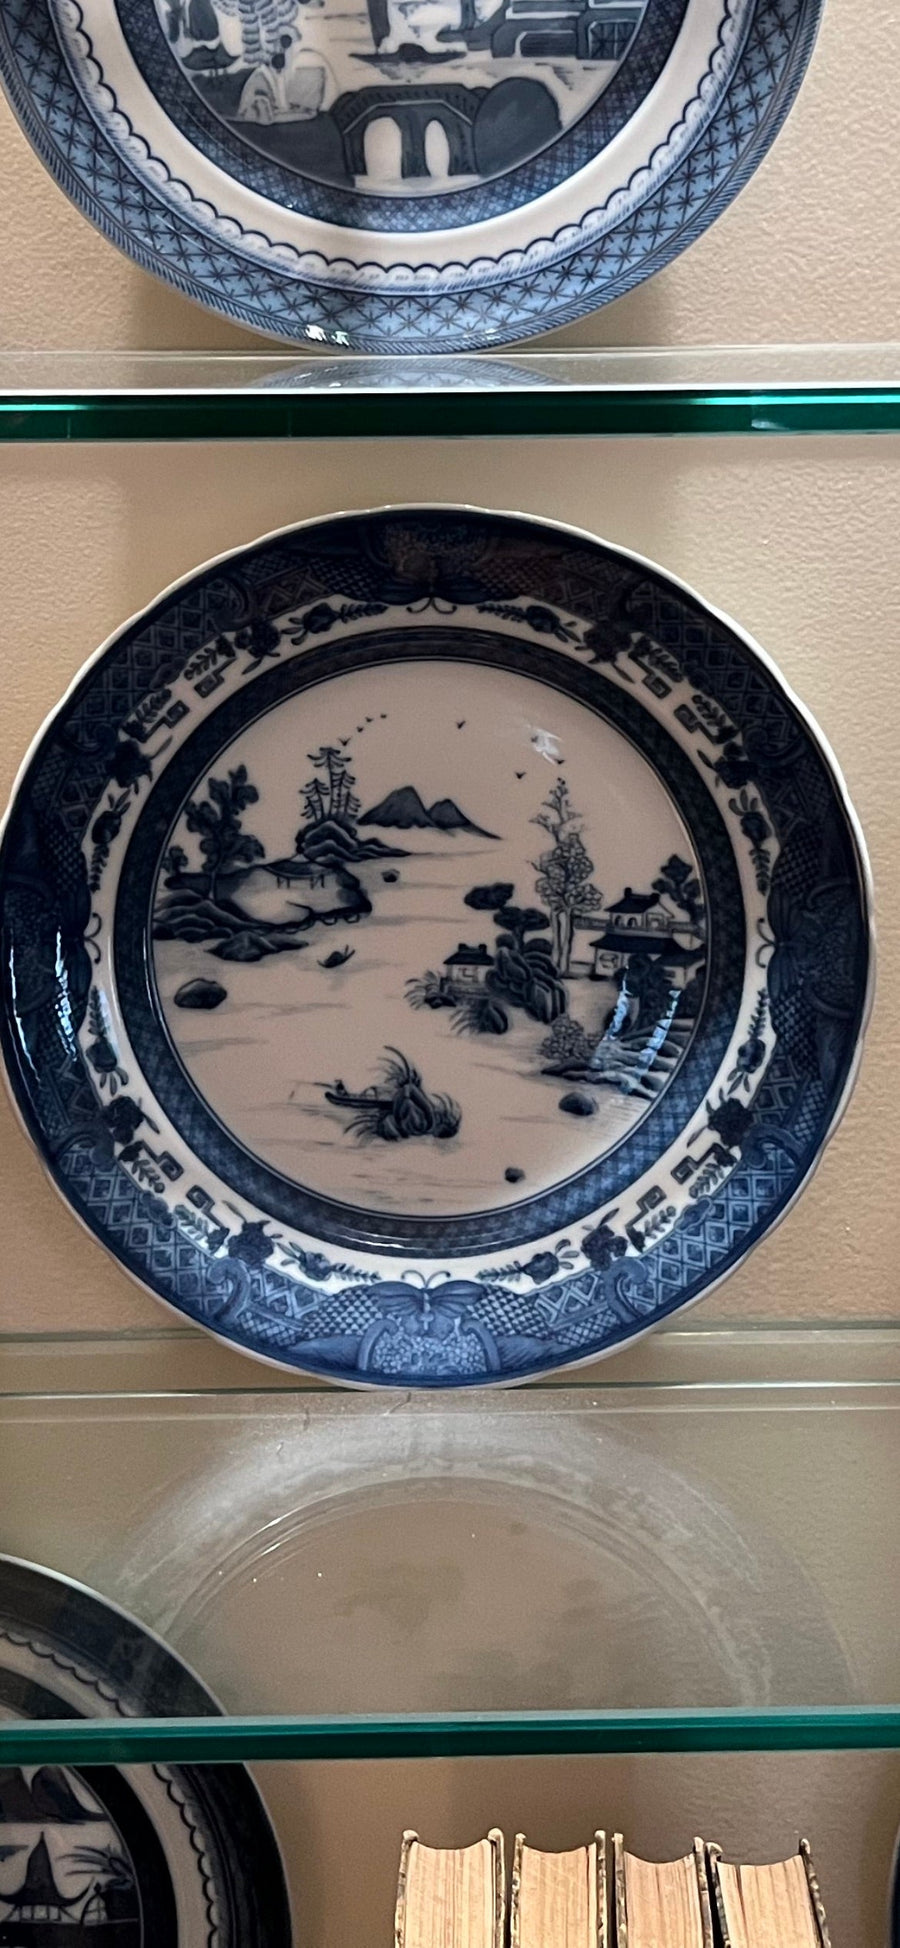 Mottahedeh Blue and White Plate